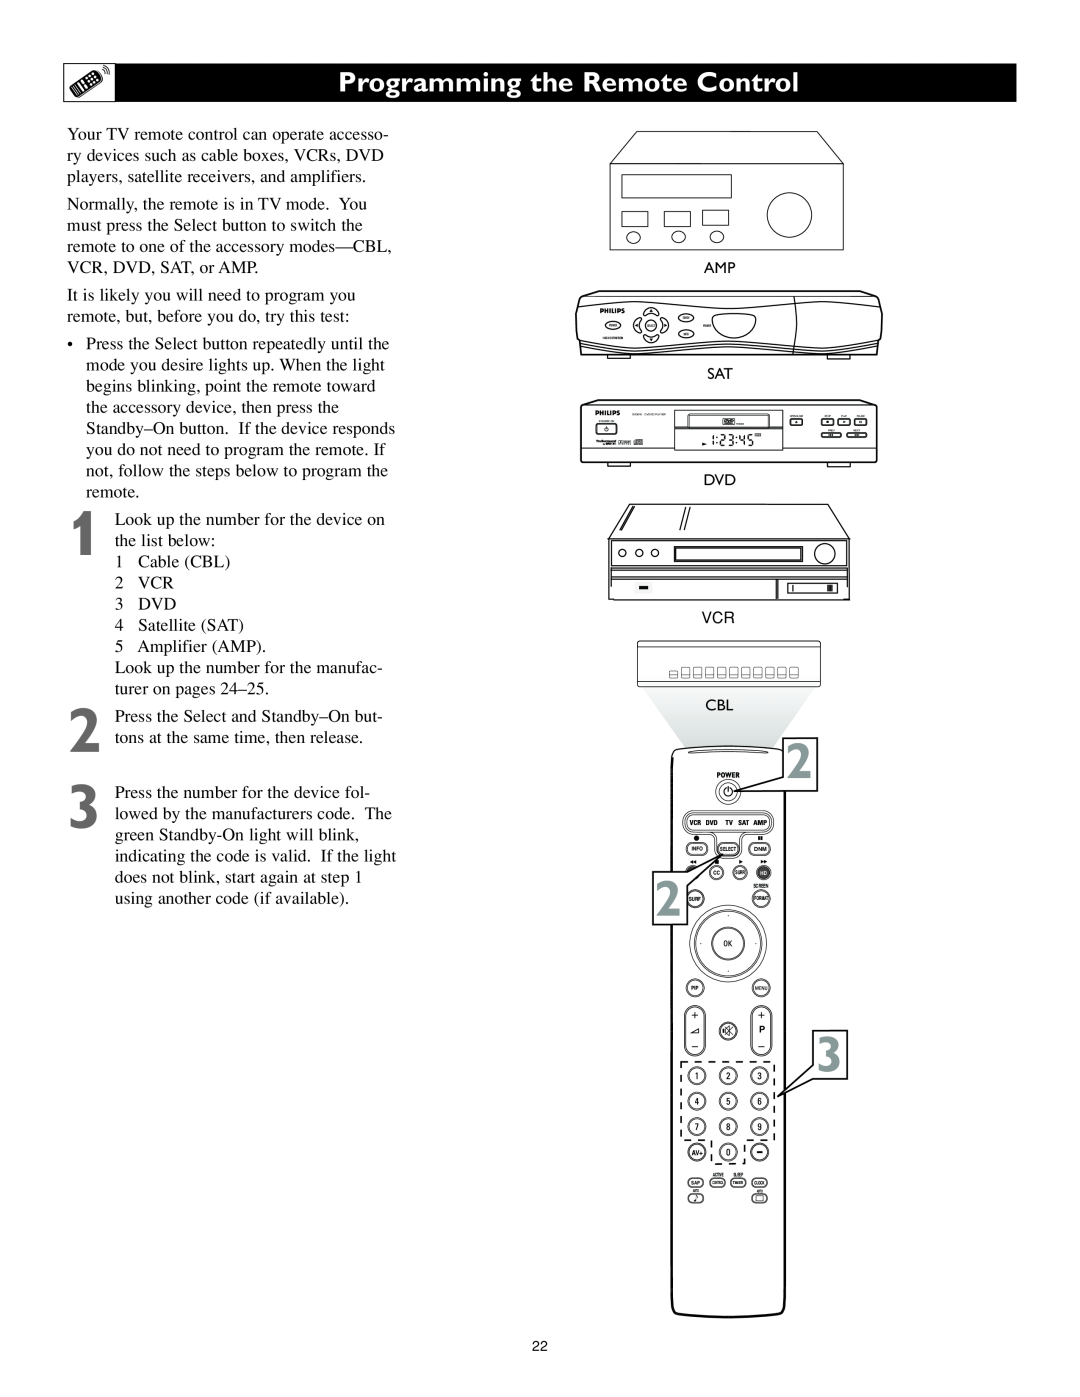 Philips 62PL9524, 55PL9524 setup guide Programming the Remote Control 